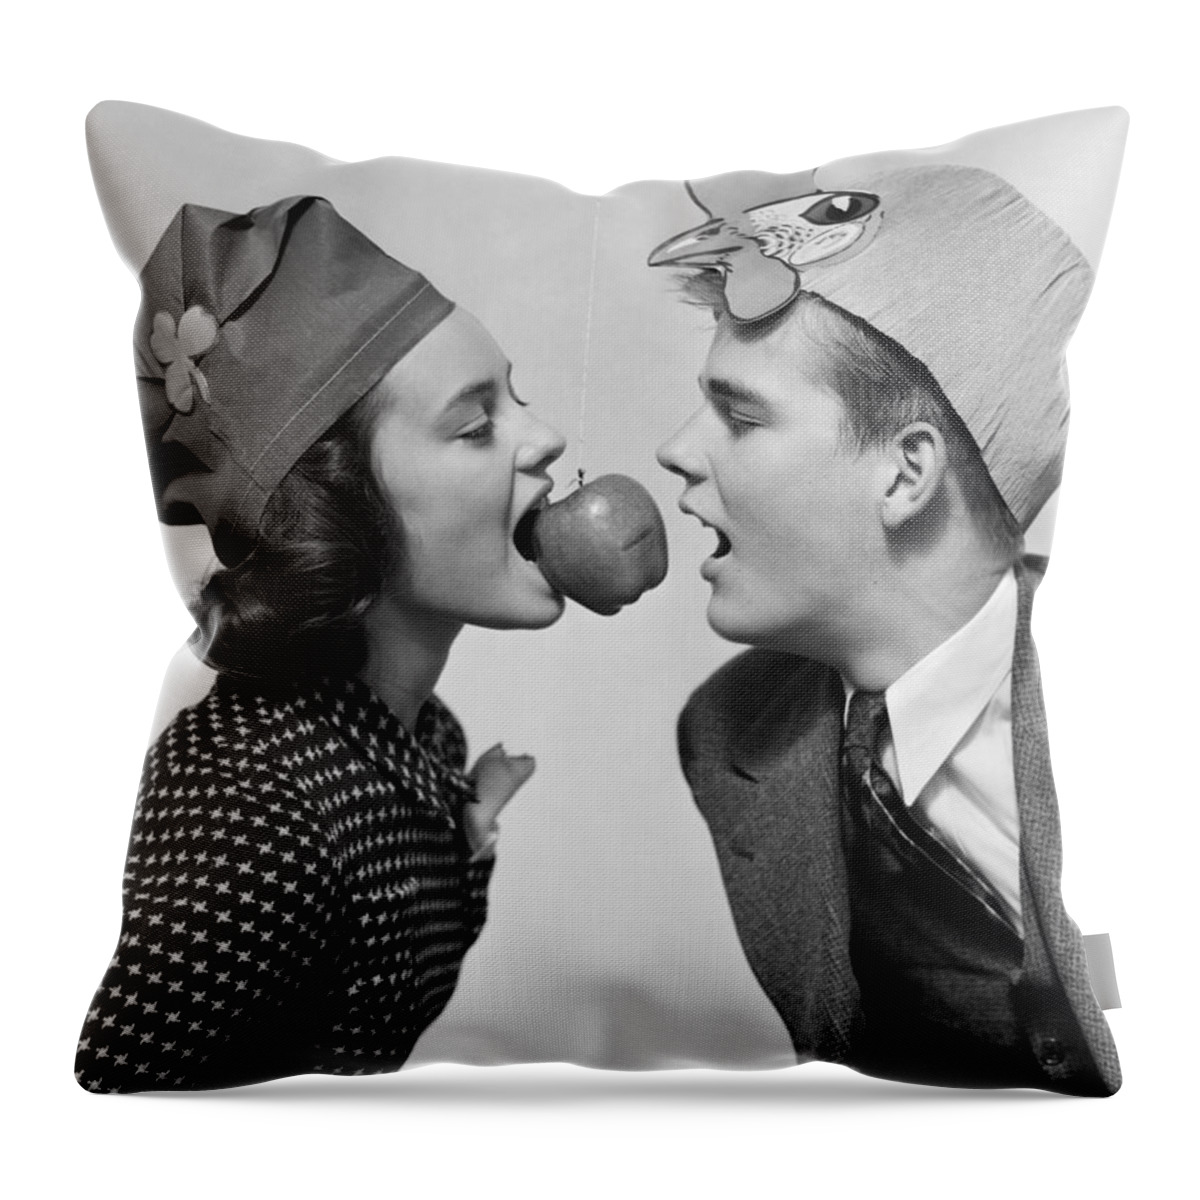 1940s Throw Pillow featuring the photograph Teen Girl And Boy Bobbing For Apple by H. Armstrong Roberts/ClassicStock